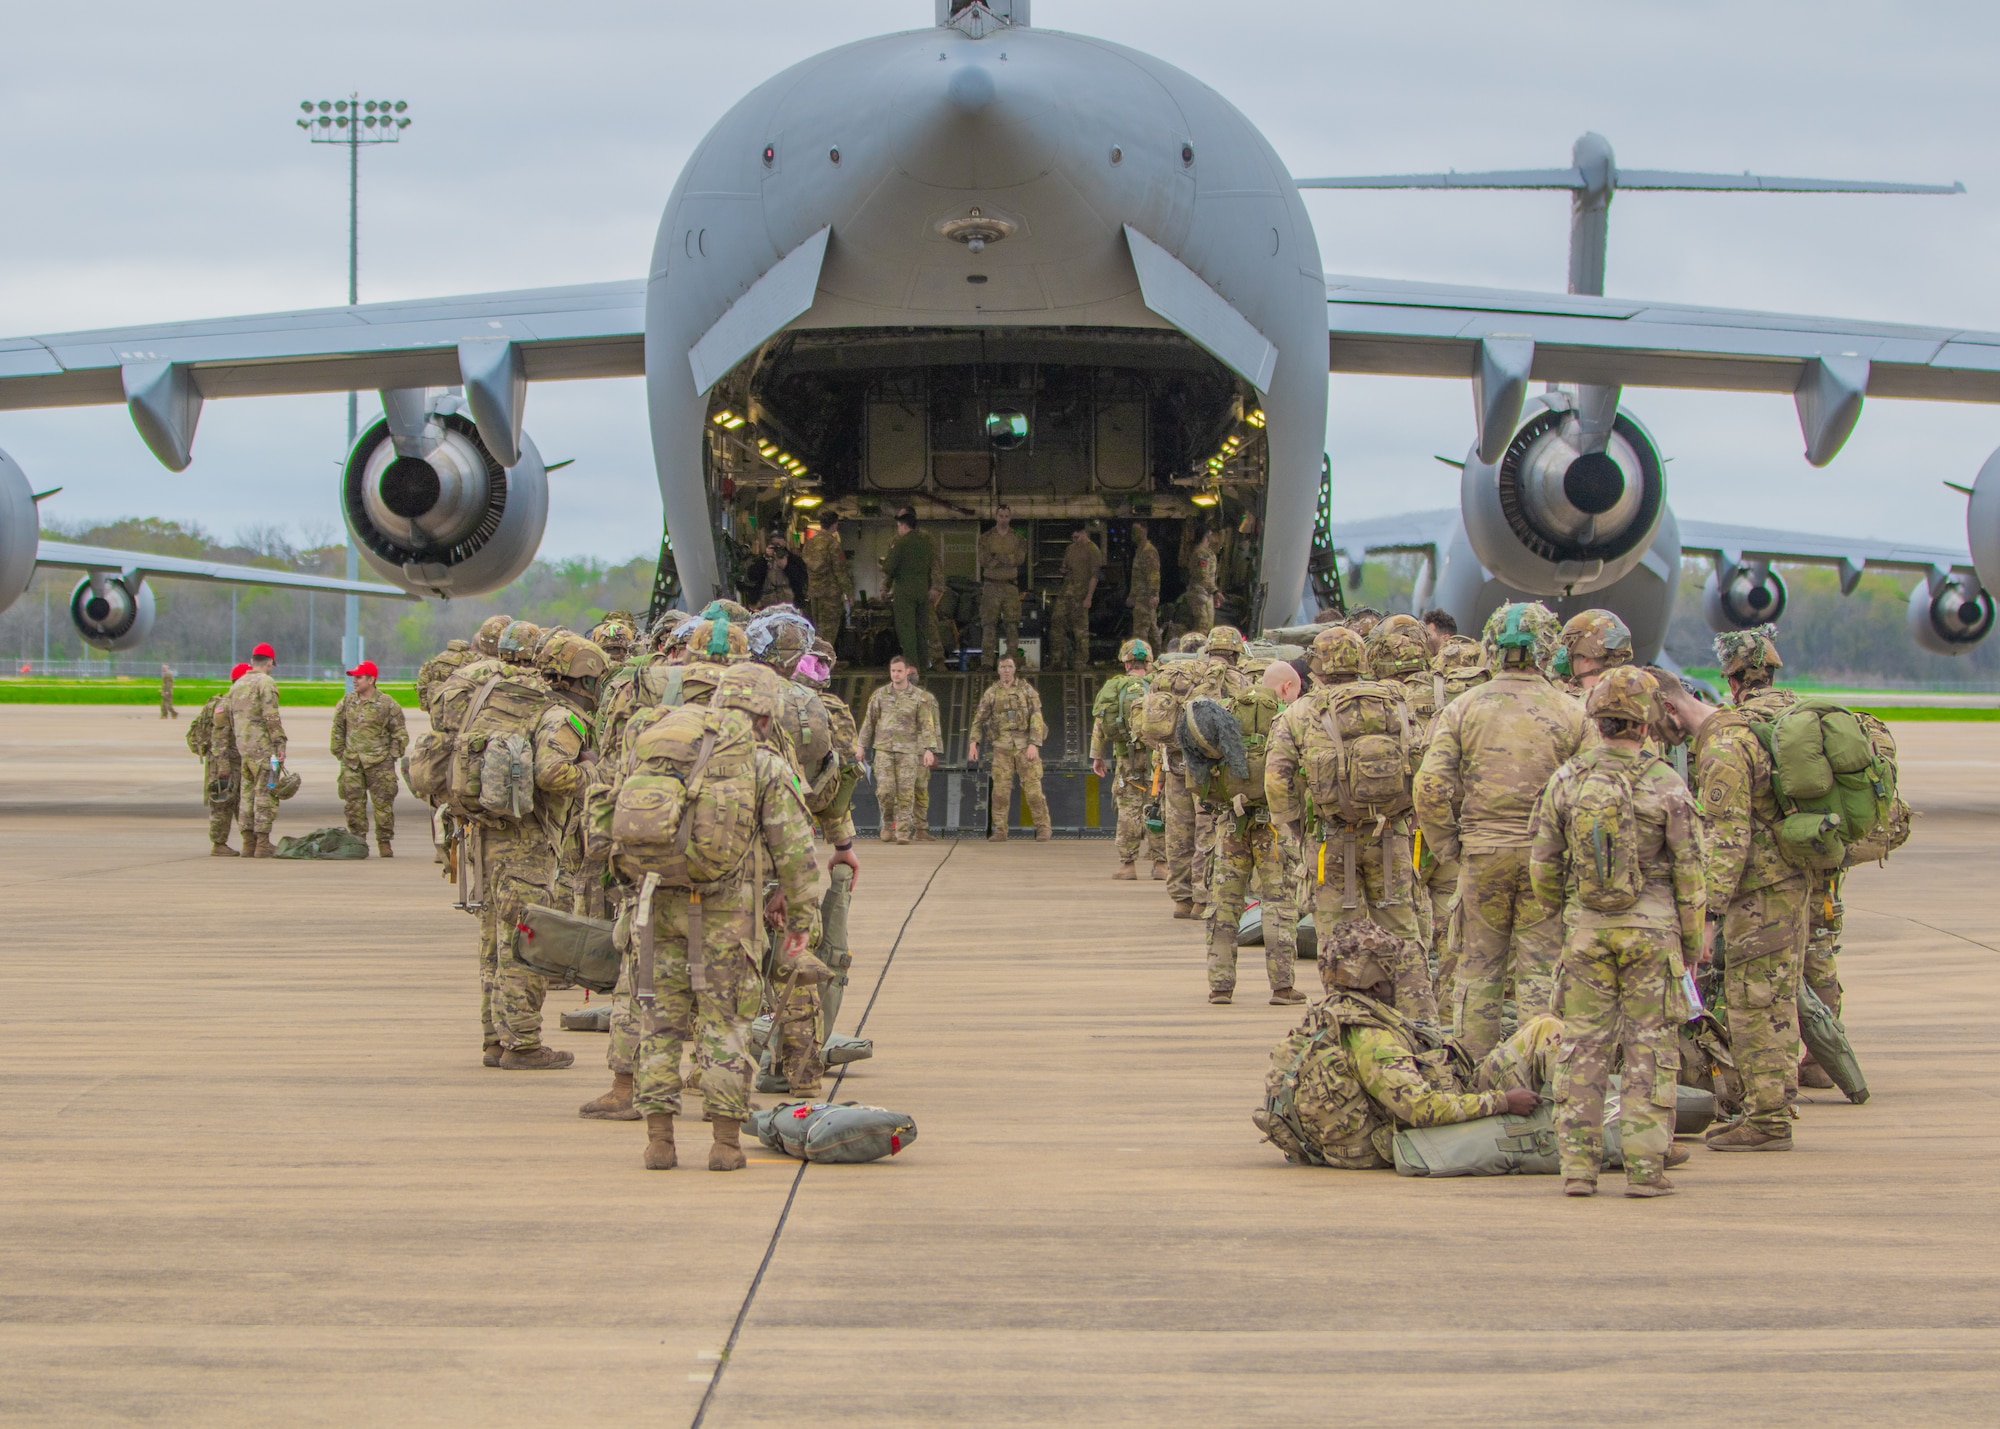 Soldiers load into aircraft.